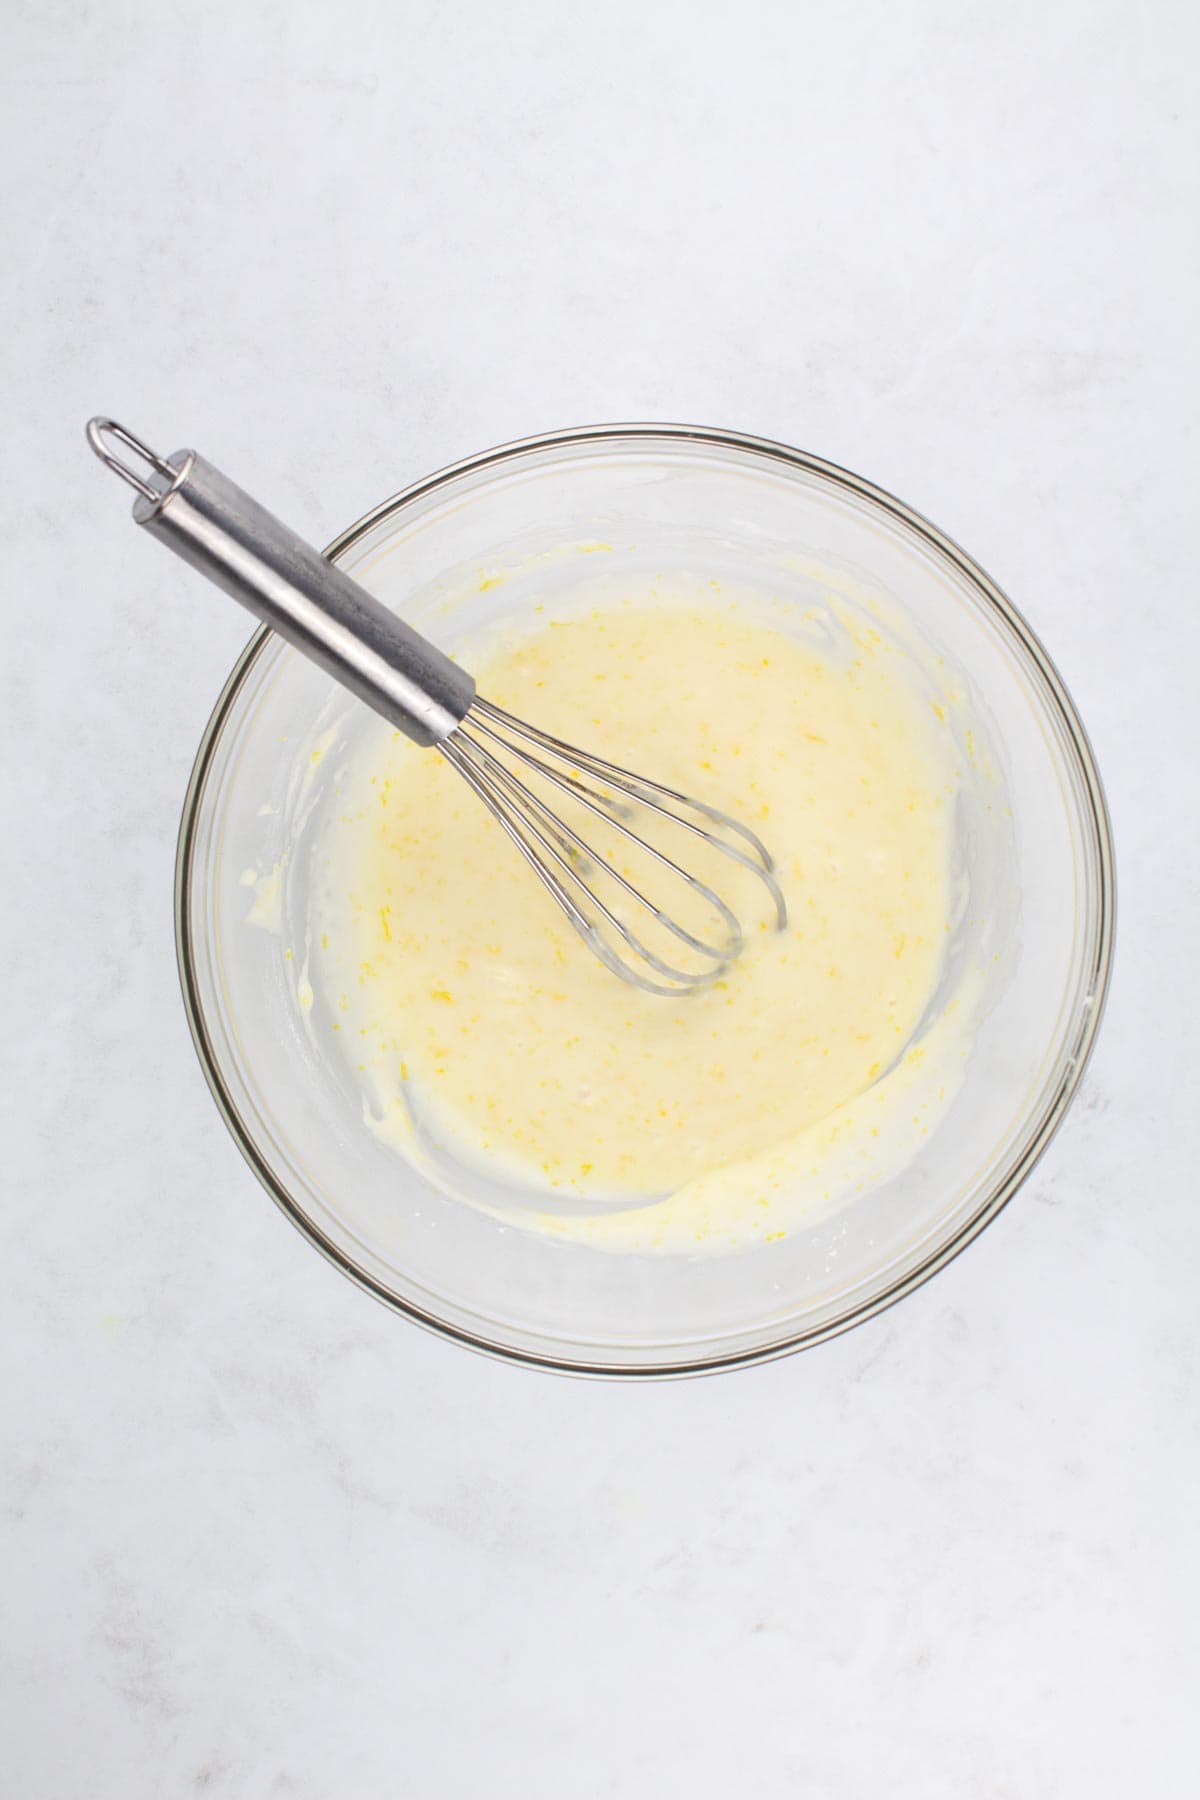 Ingredients for lemon glaze including powdered sugar, lemon juice, and heavy cream mixed in a bowl.